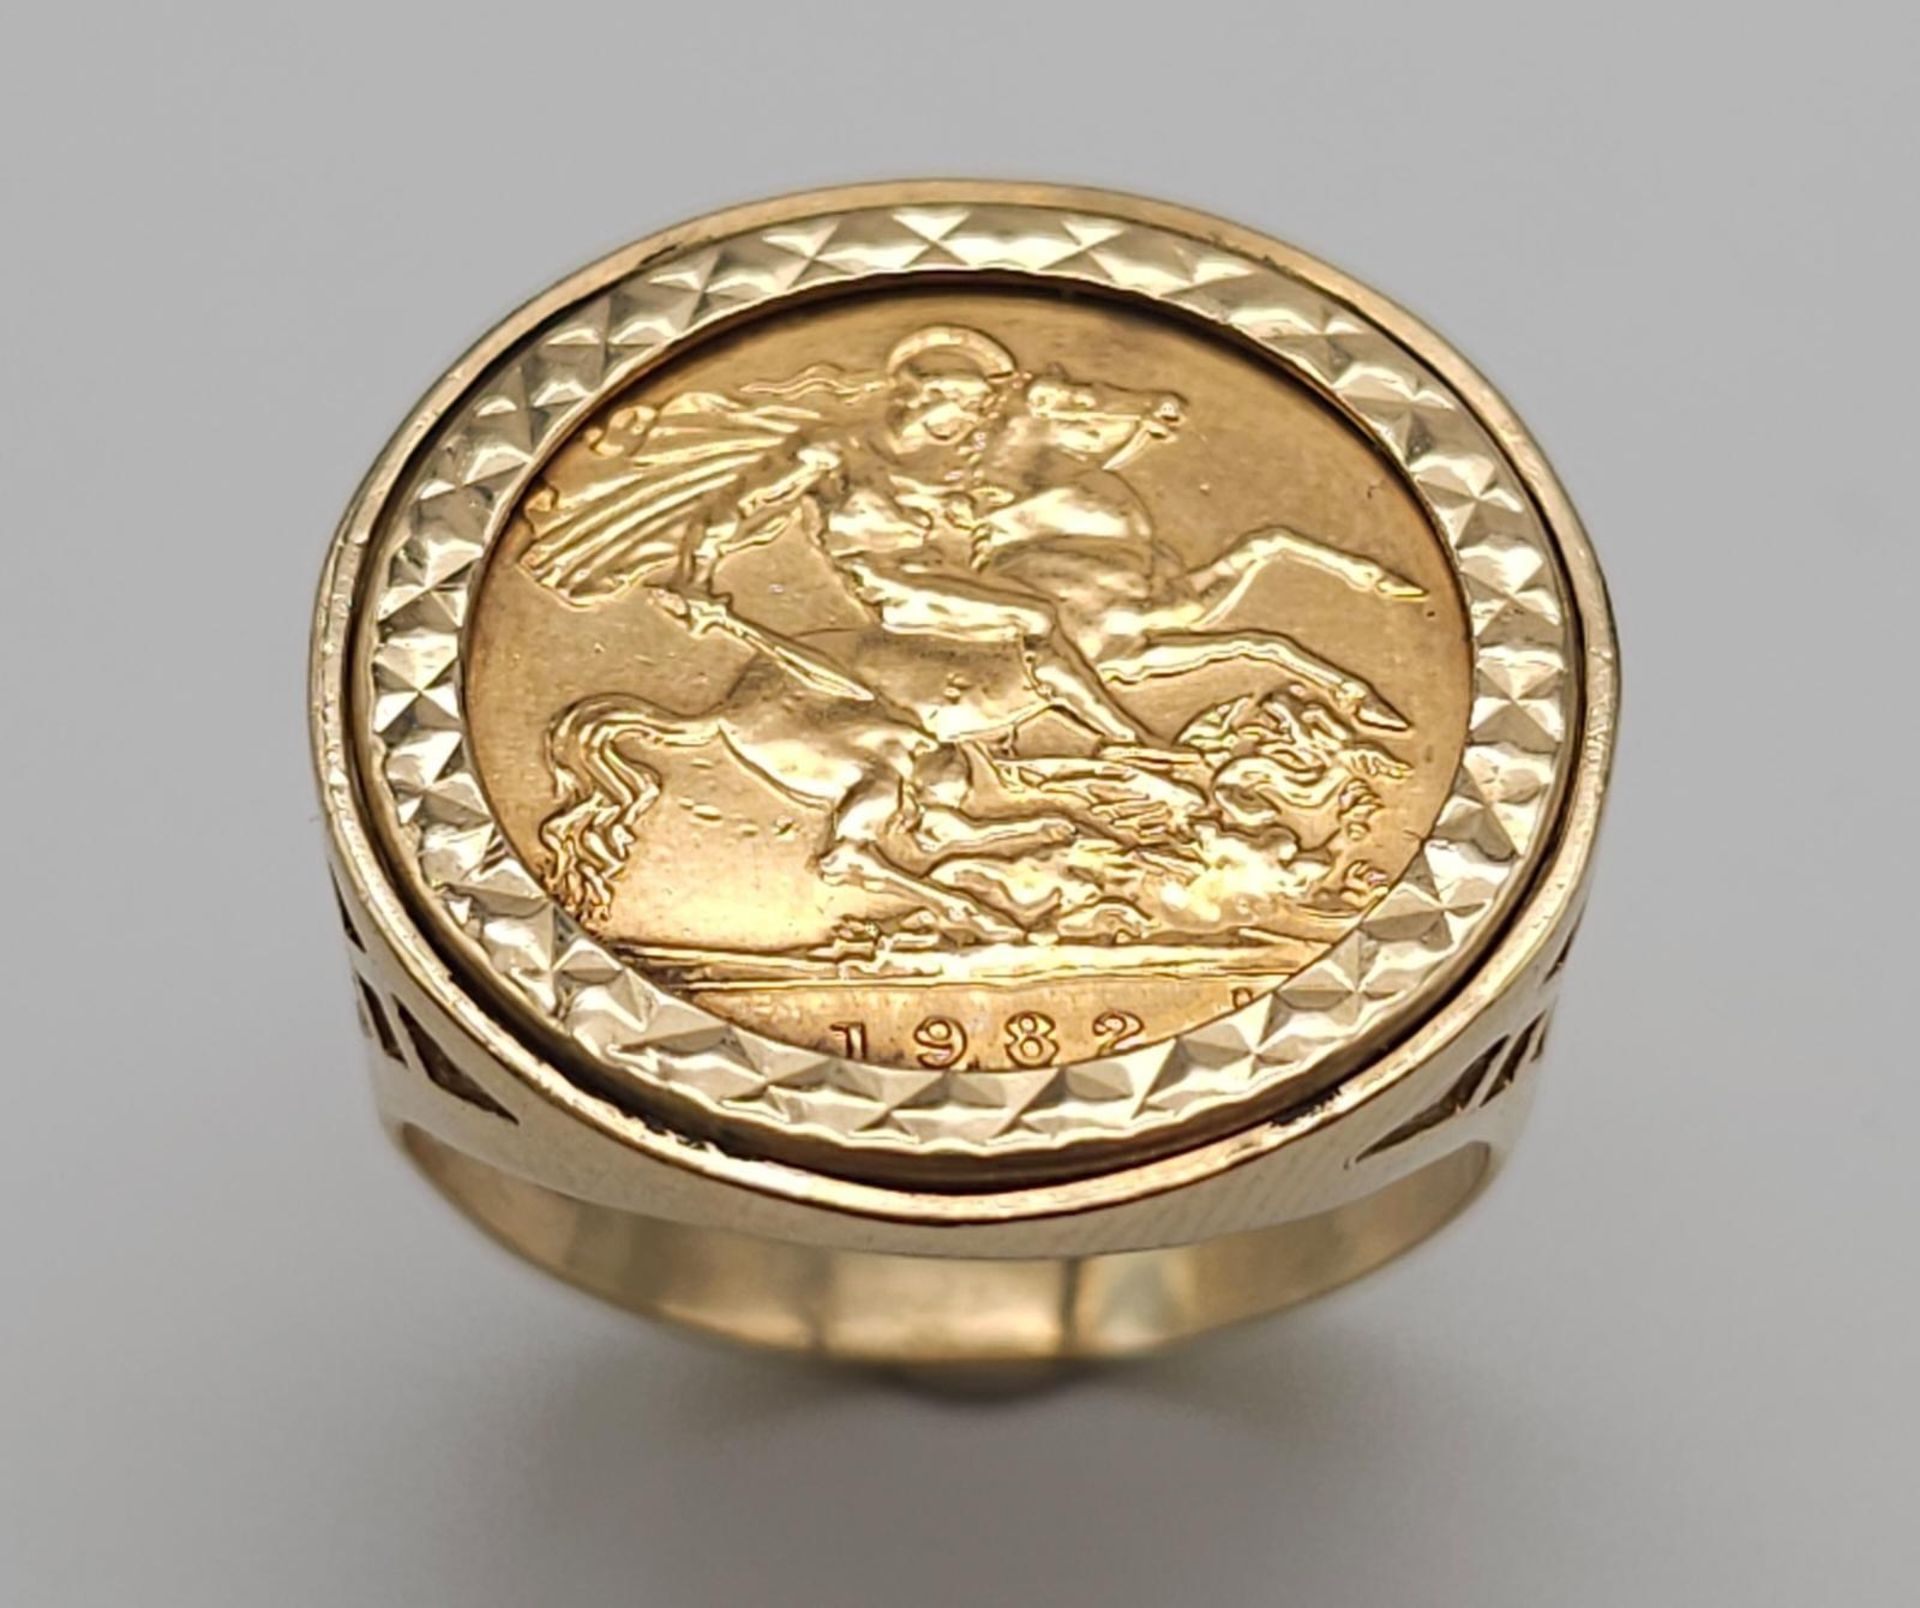 22k yellow gold half sovereign coin, dated 1982 with Queen Elizabeth, set into a 9k yellow gold ring